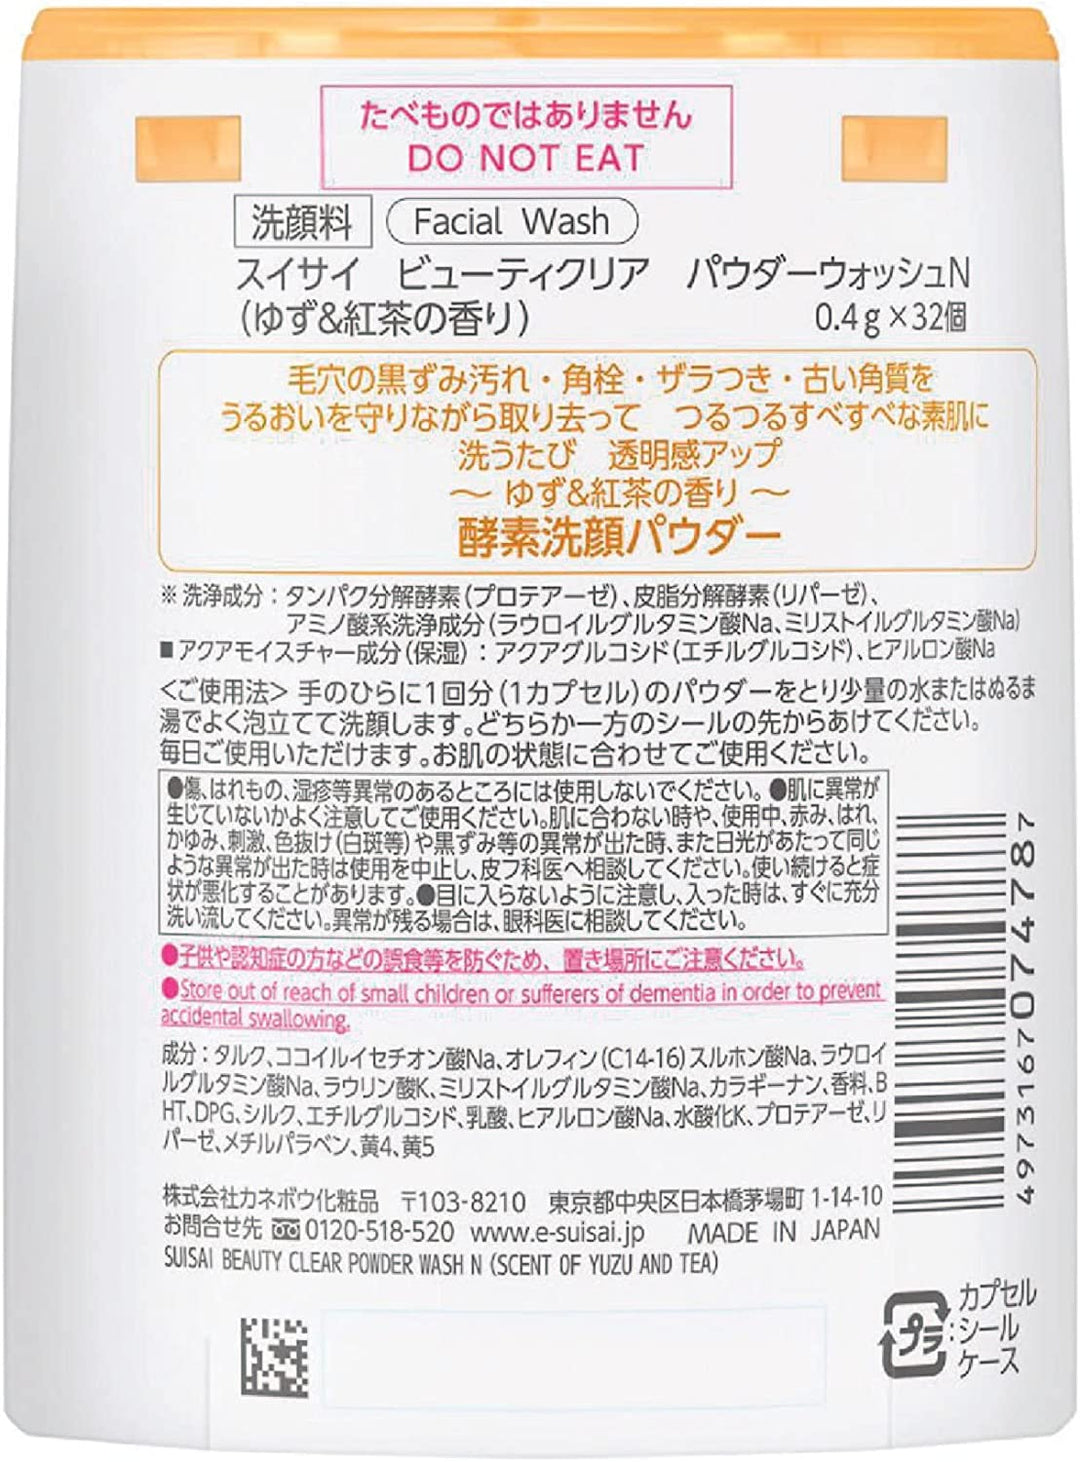 Kanebo Japan suisai Beauty Clear Enzyme Cleansing Powder Wash N Yuzu & Tea Limited Scent